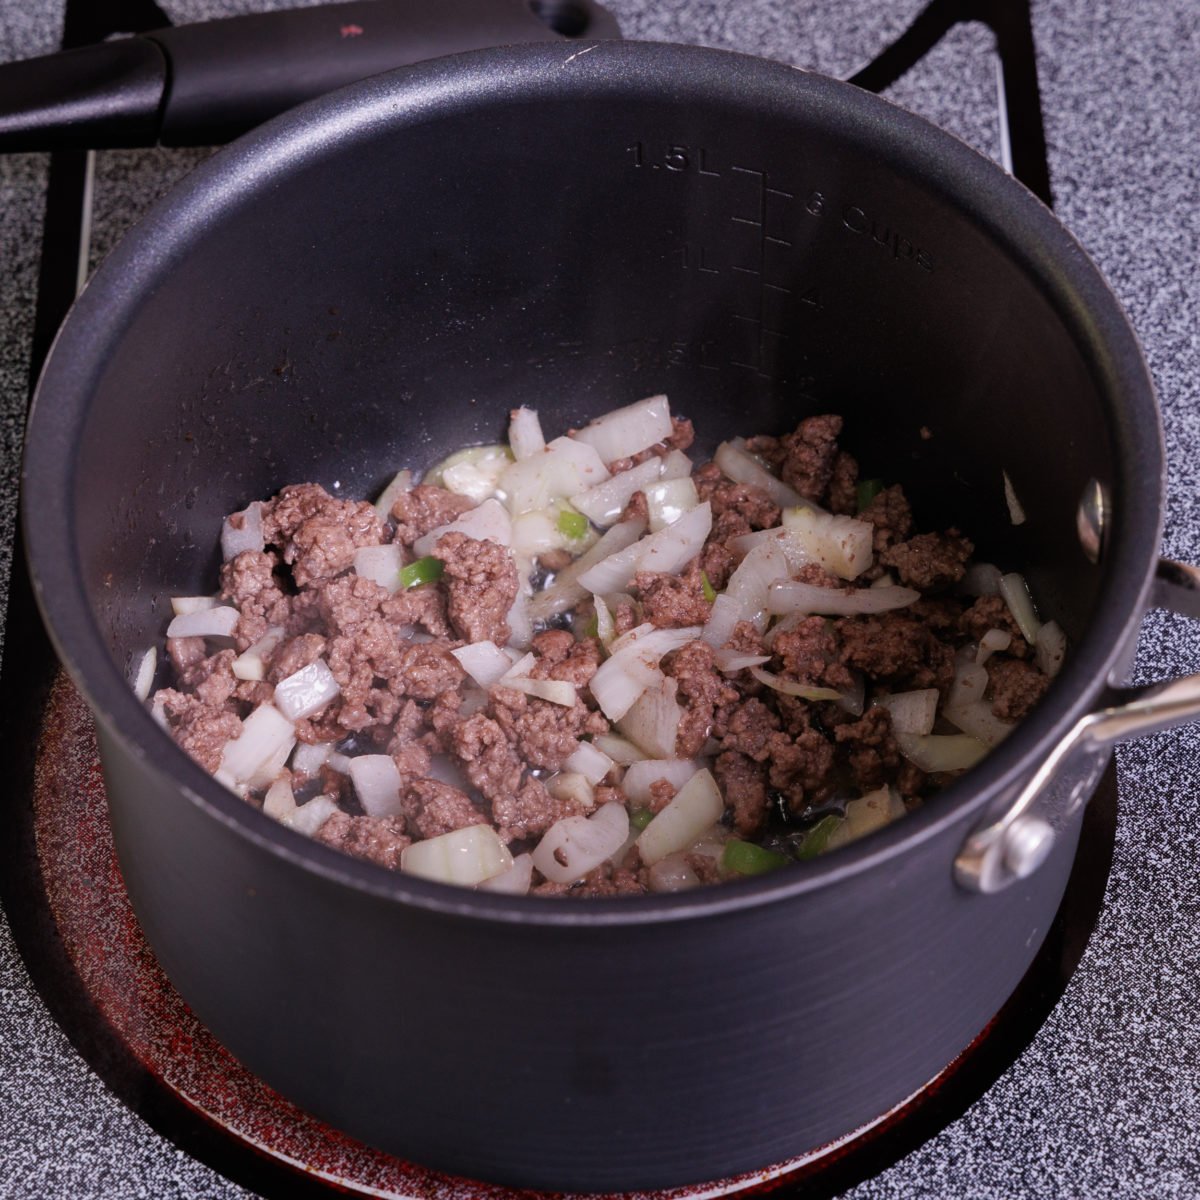 ground beef, onions, and garlic in a small black pot.